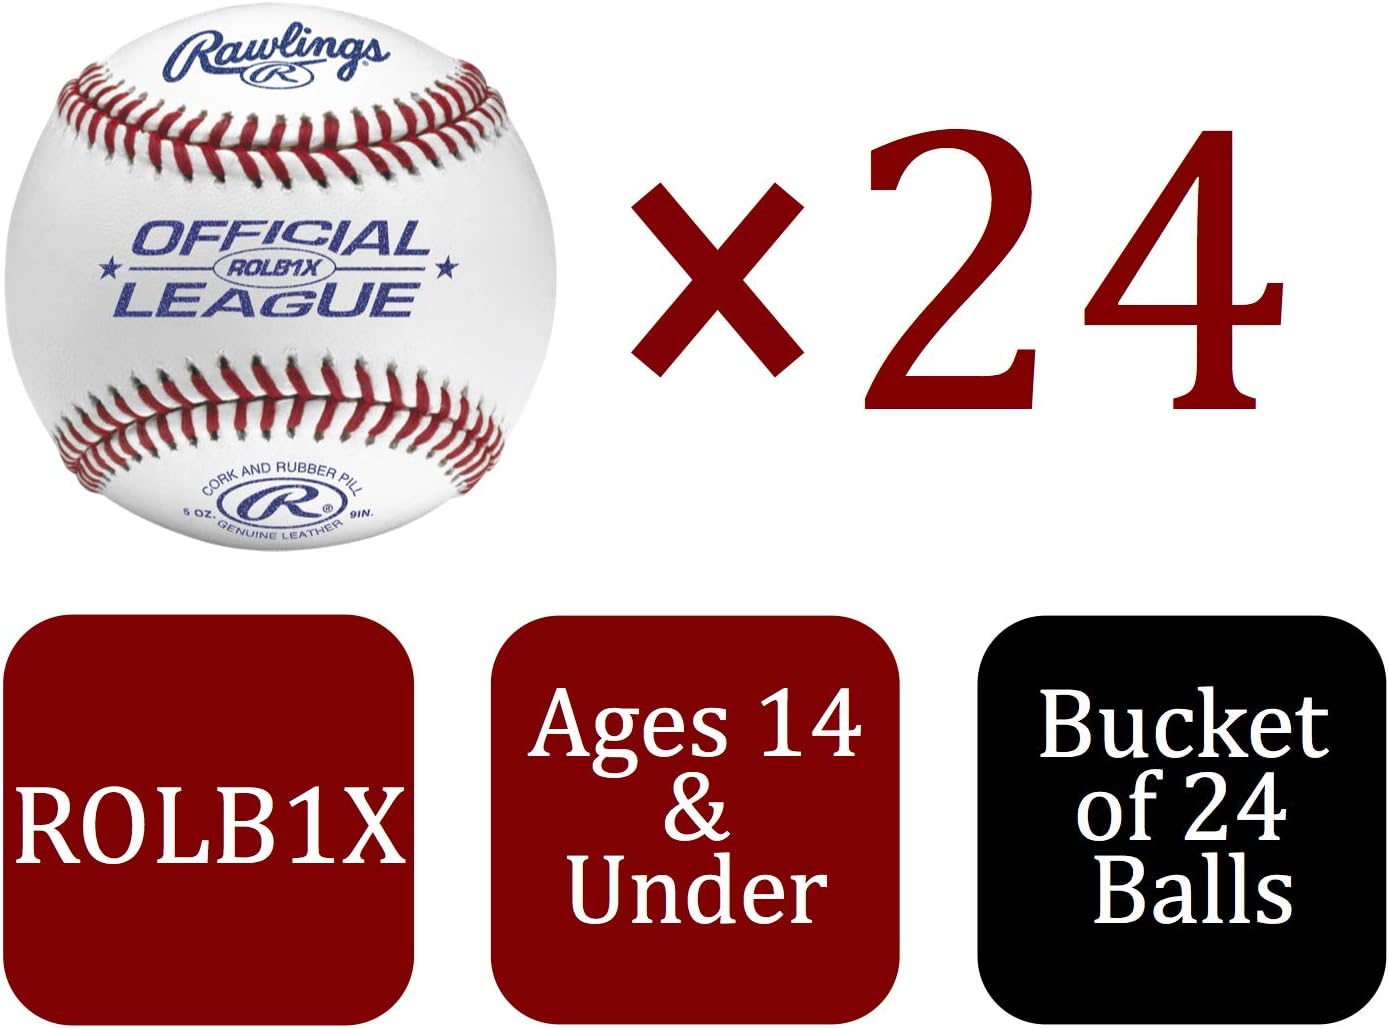 Rawlings Official League Competition Grade Baseballs 4 Count